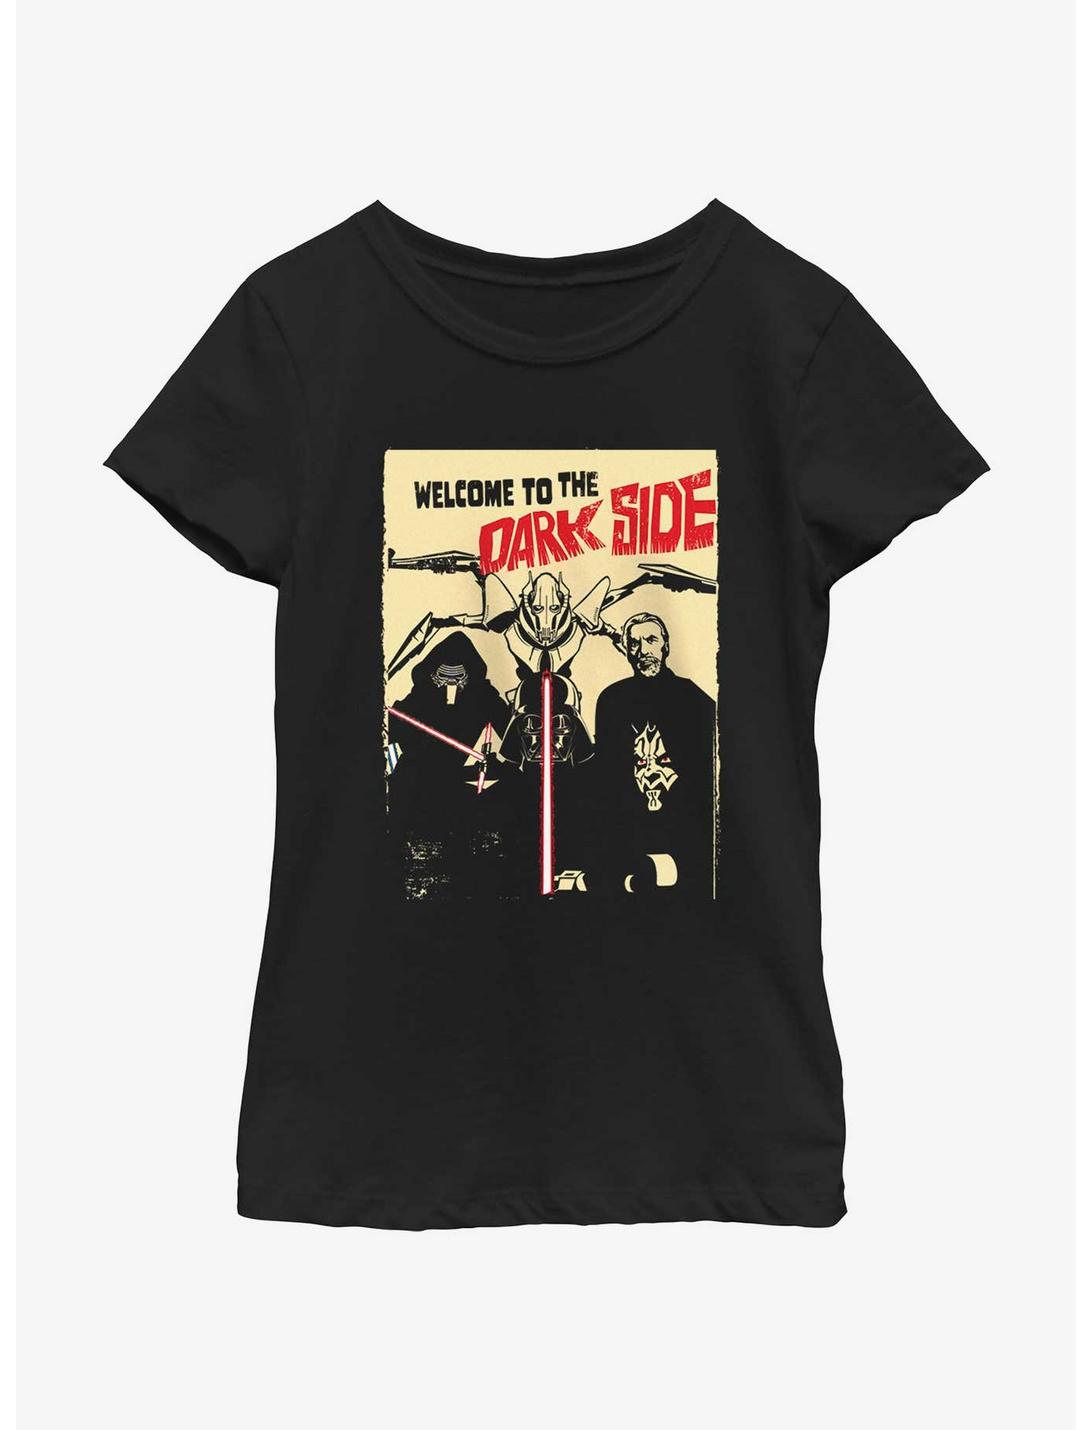 Star Wars Welcome To The Dark Side Retro Poster Youth Girls T-Shirt, BLACK, hi-res